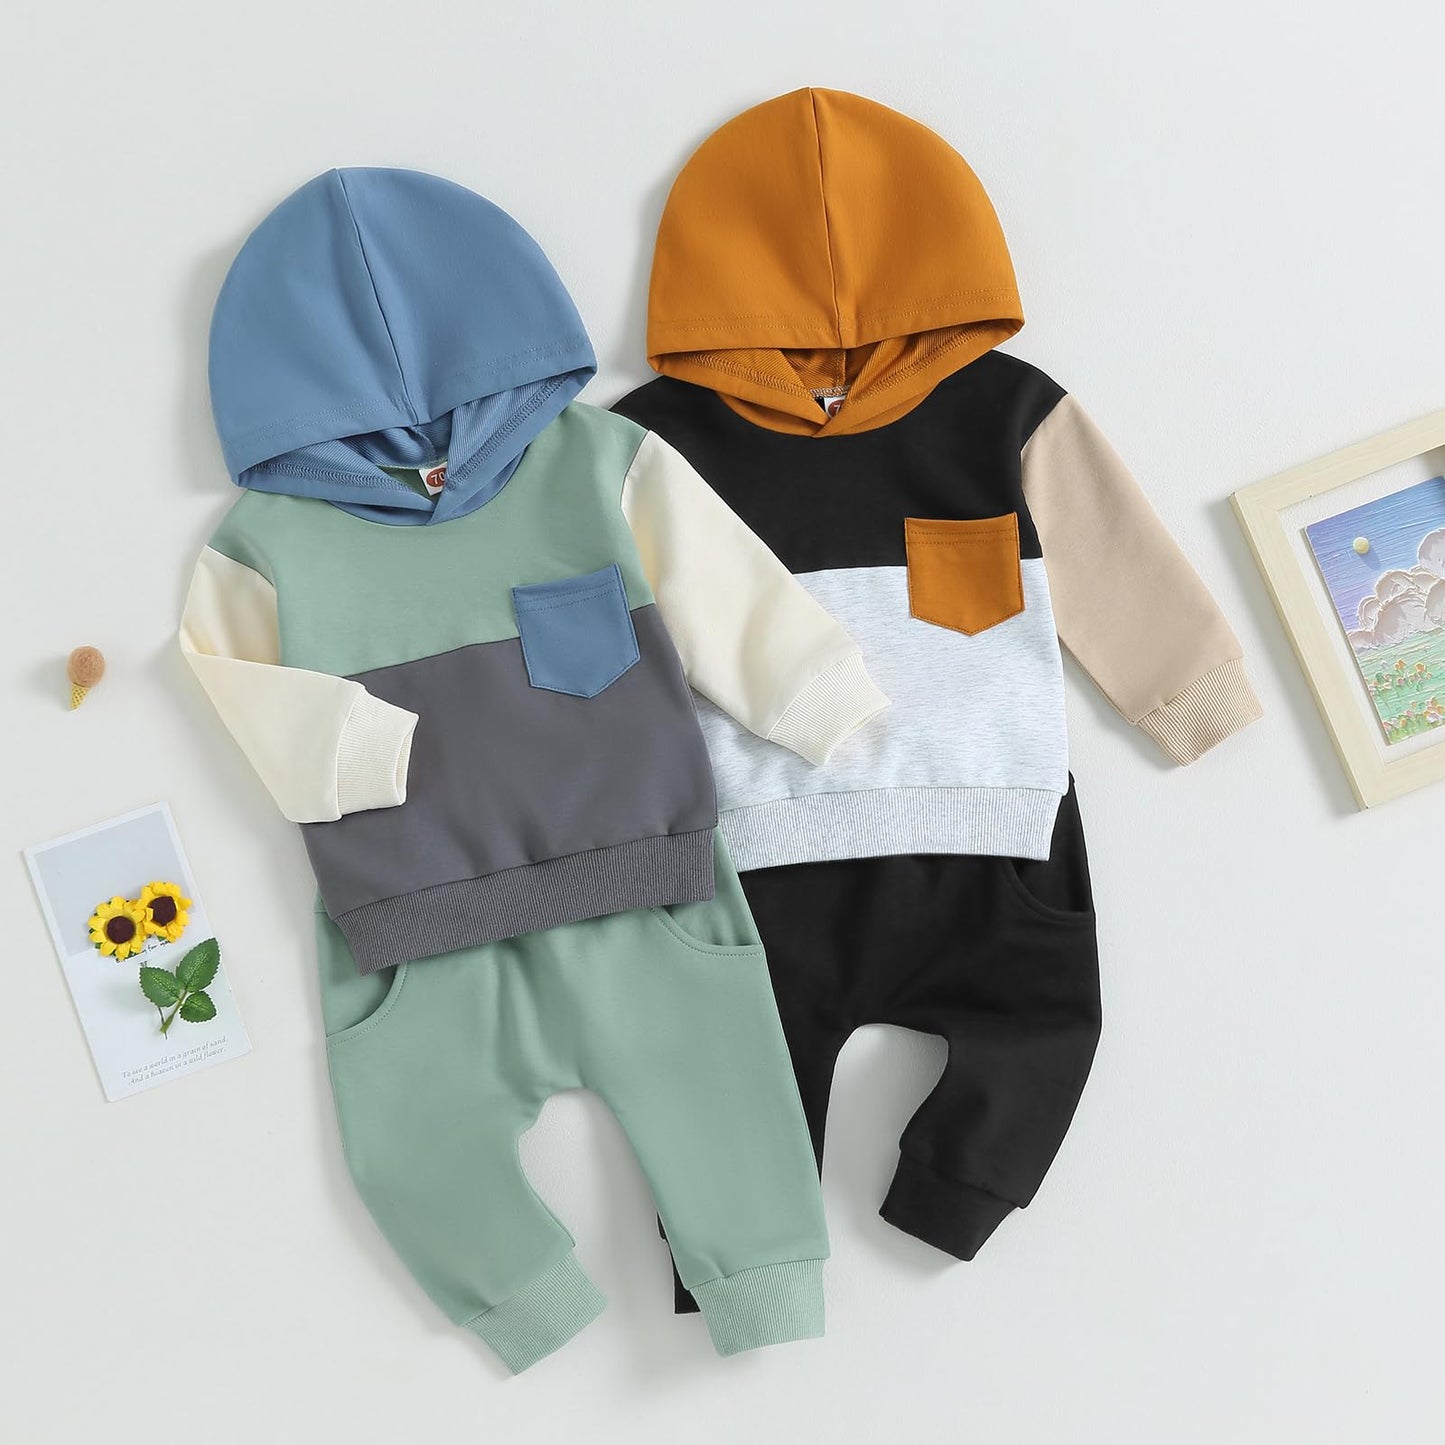 BeQeuewll Fall Winter Toddler Baby Boy Clothes 2Pcs Color Block Crewneck Sweatshirt and Sweatsuit Little Boy Clothing   0-6 Monts